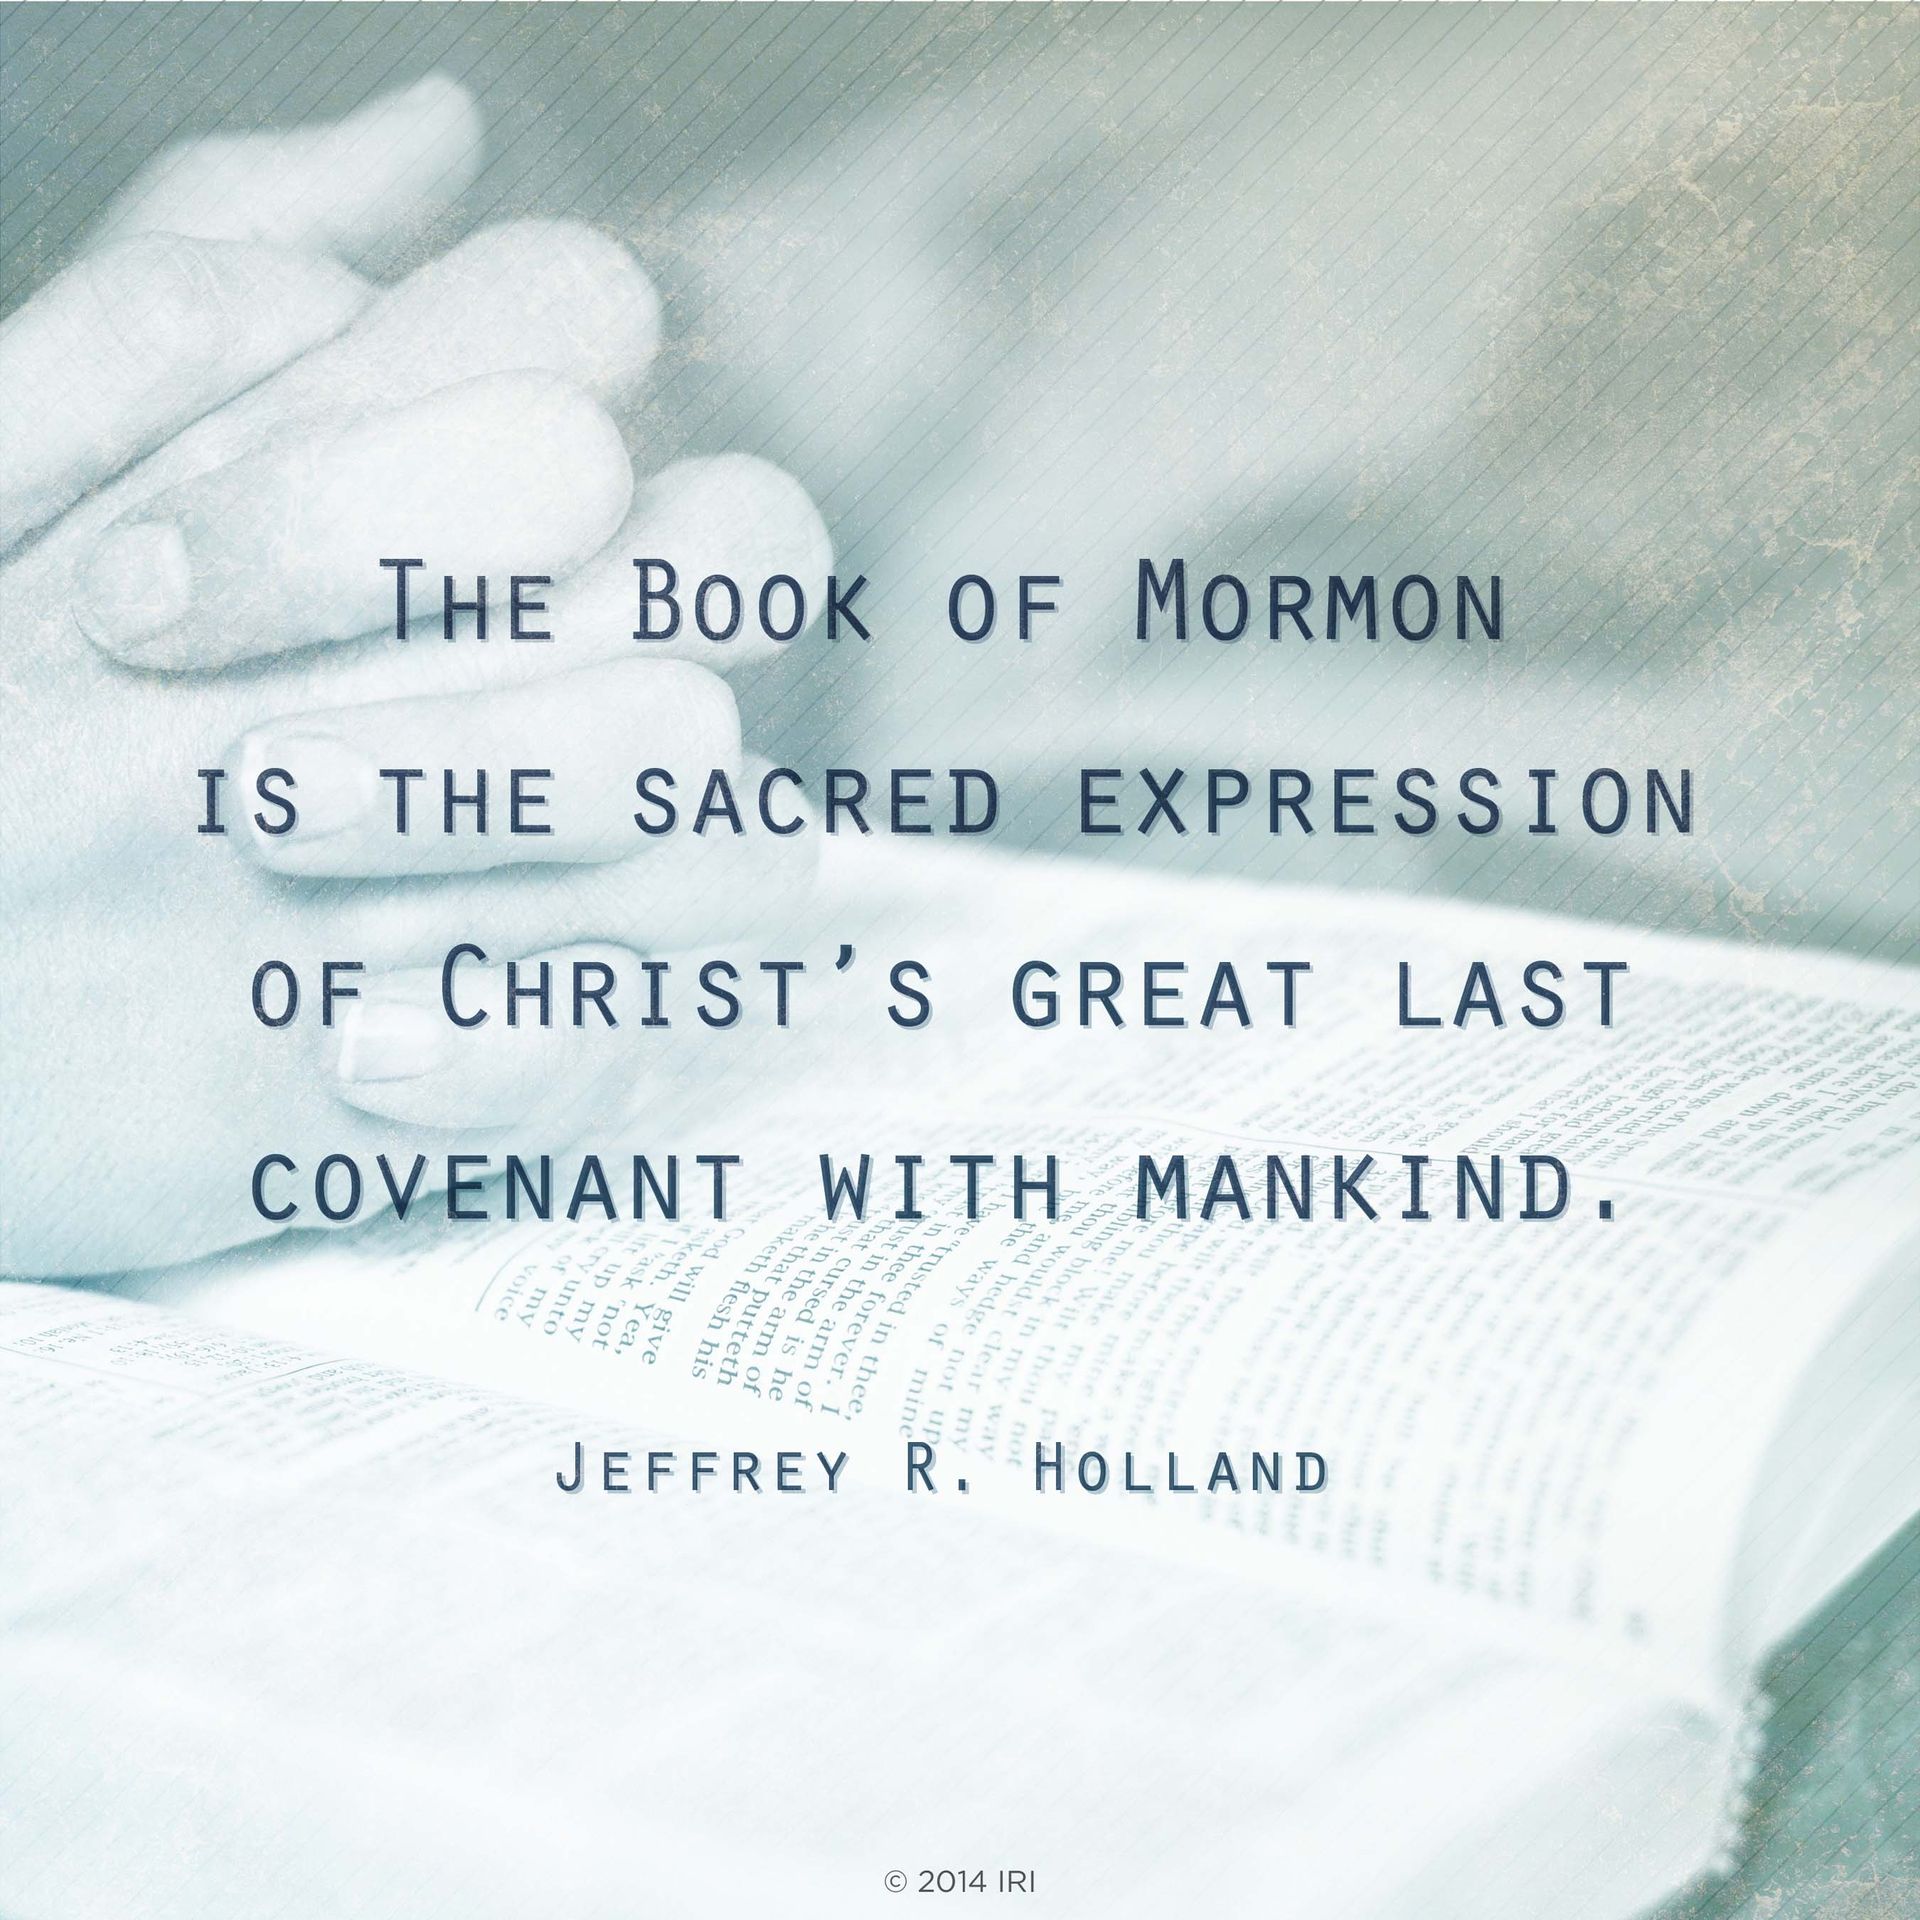 “The Book of Mormon is the sacred expression of Christ’s great last covenant with mankind.”—Elder Jeffrey R. Holland, “A Testimony, a Covenant, and a Witness”